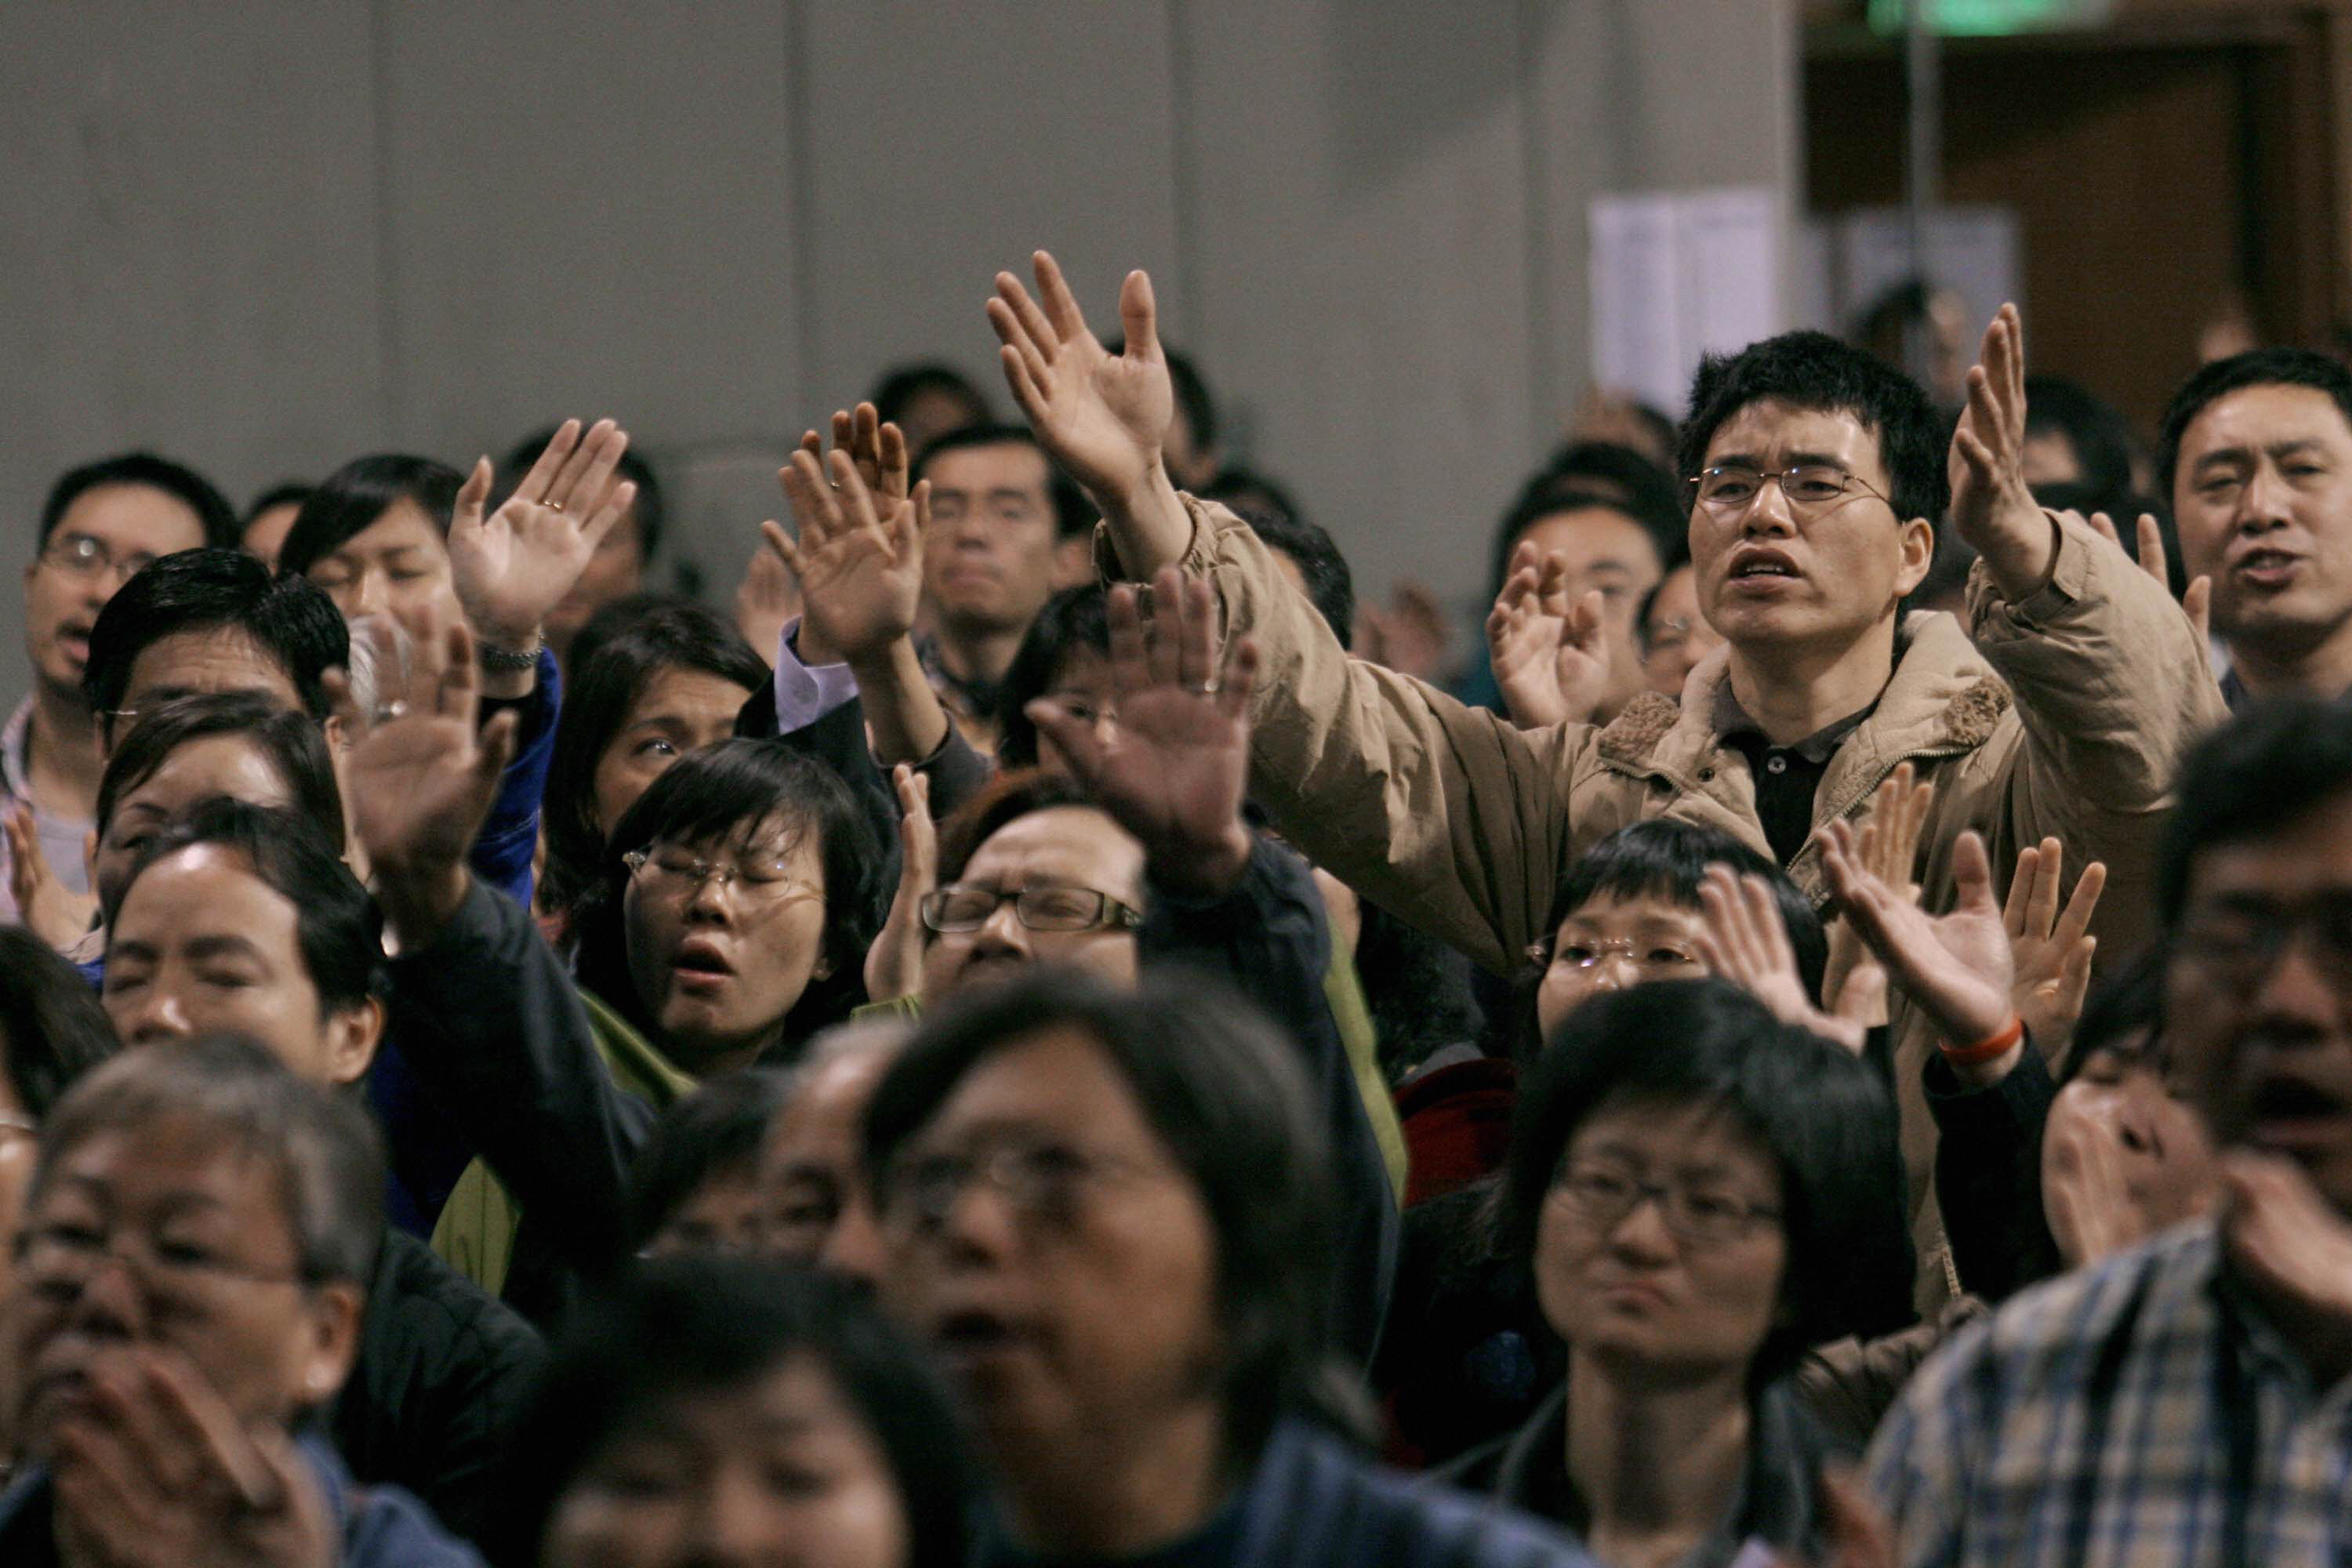 Participants raise their hands in prayer during the first Global Chinese Alpha conference in Hong Kong, April 10, 2007. (AFP/Getty Images)